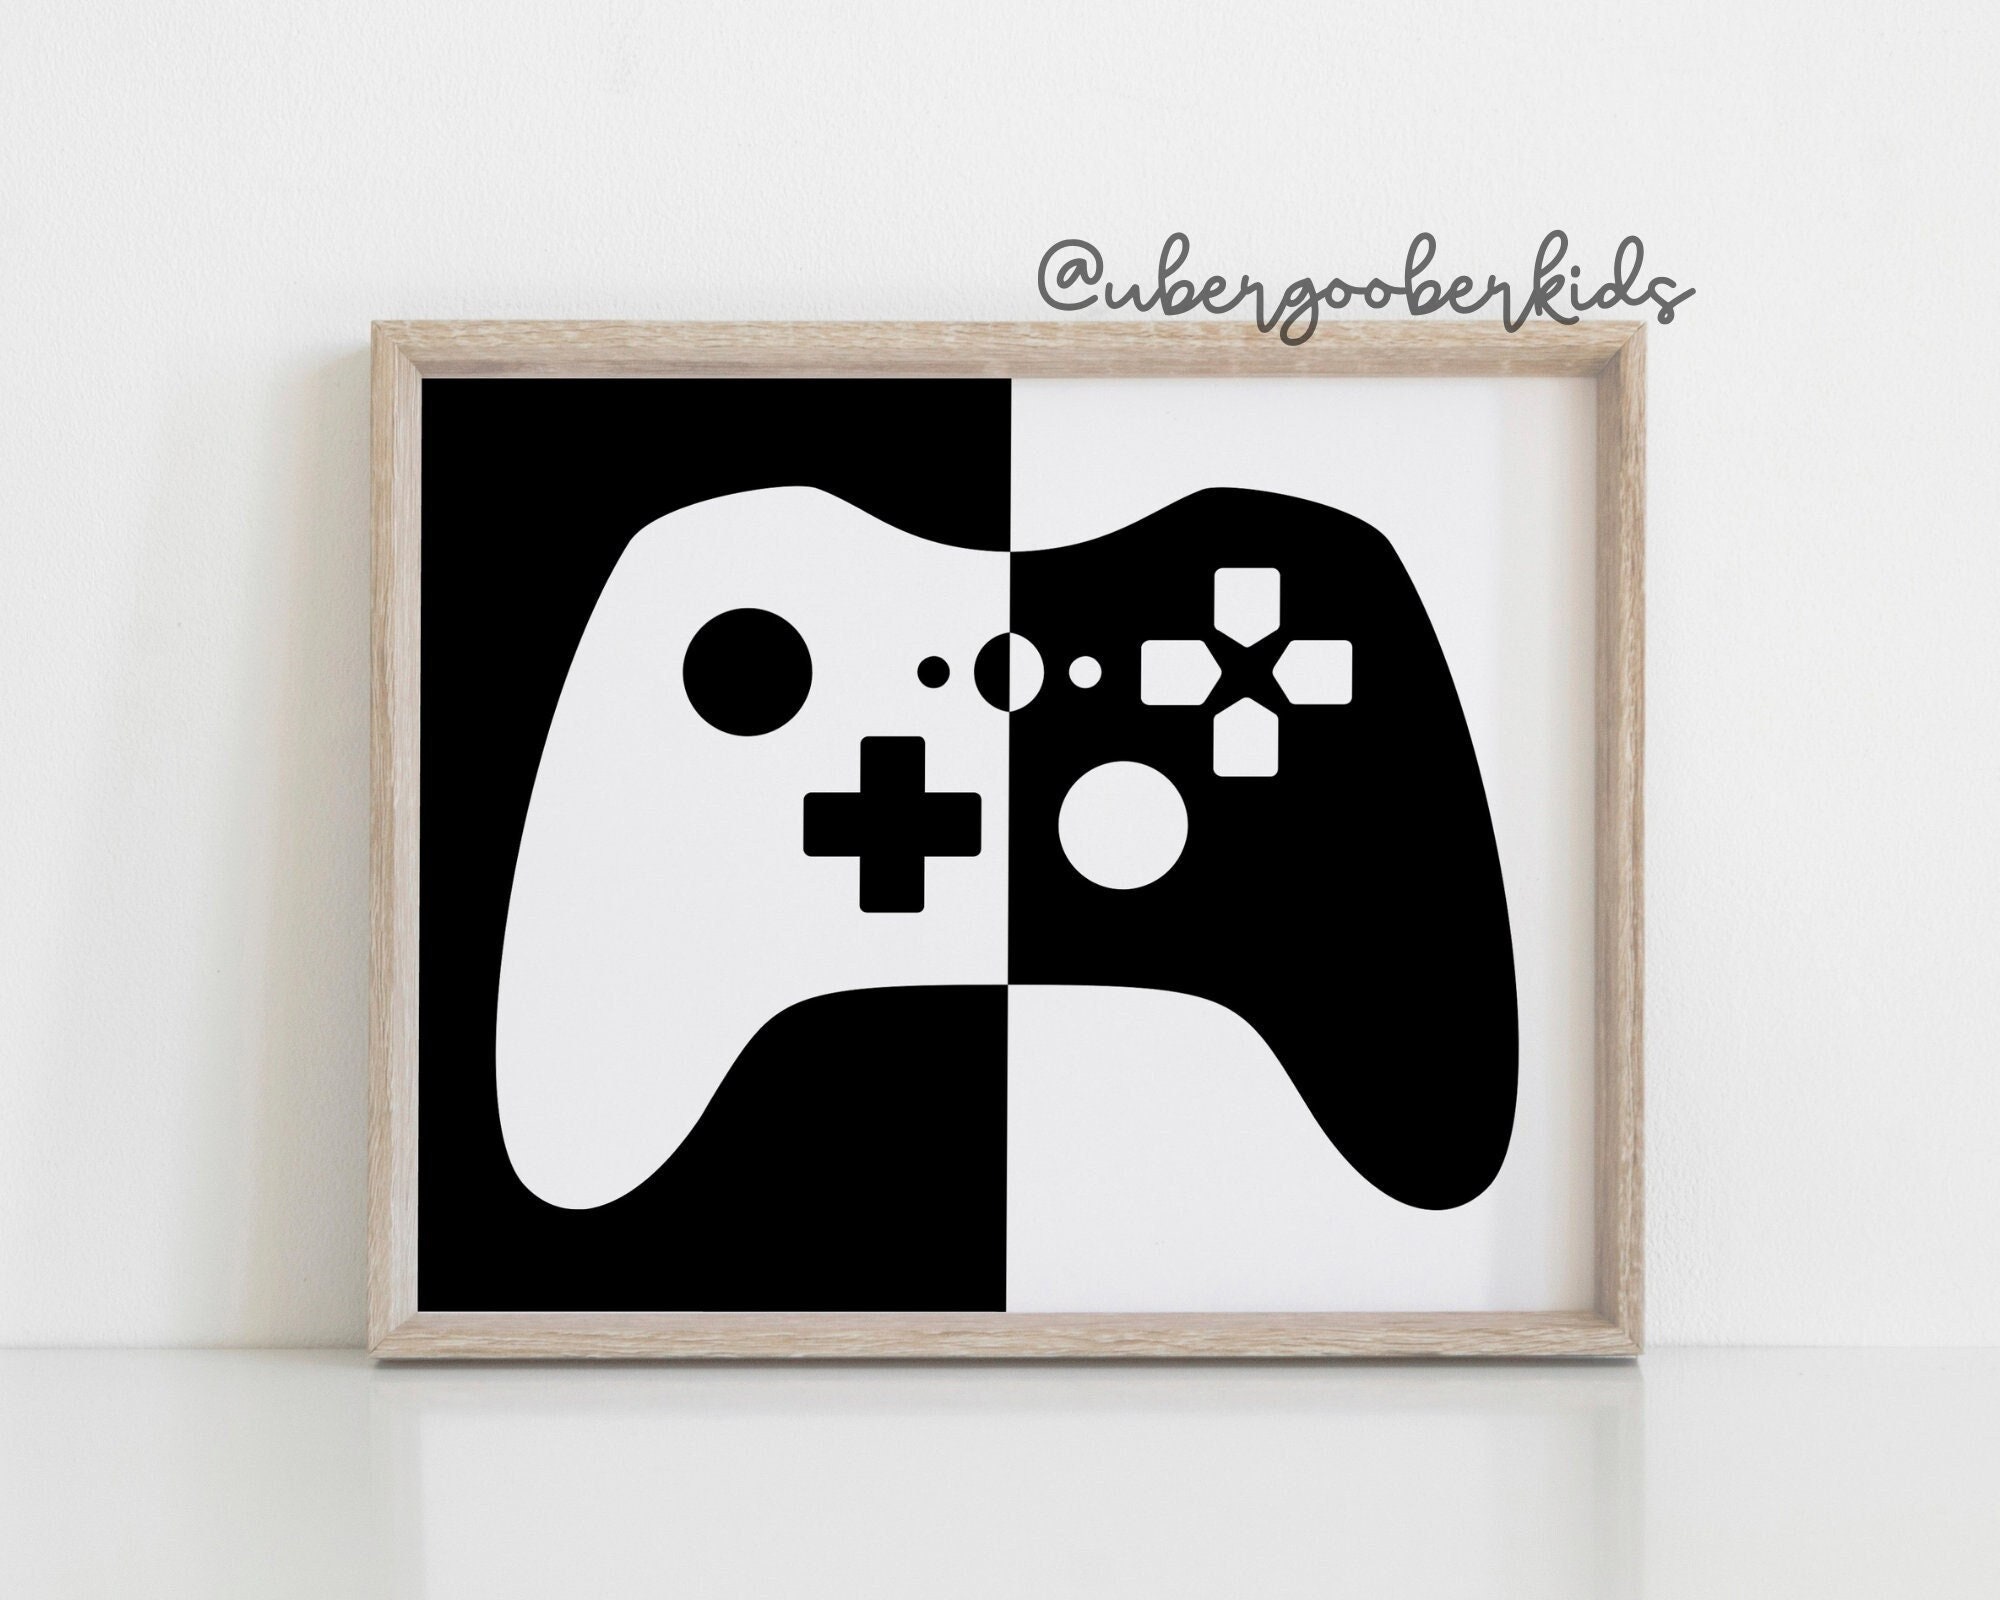 Abstract Gamepad Wall Art Poster, Gaming Console Wall Art Print on Canvas  for Video Game Home Decor, Gift for Gamer, Boy Bedroom Dorm Decoration  Unframed (50x70 cm) : : Home & Kitchen